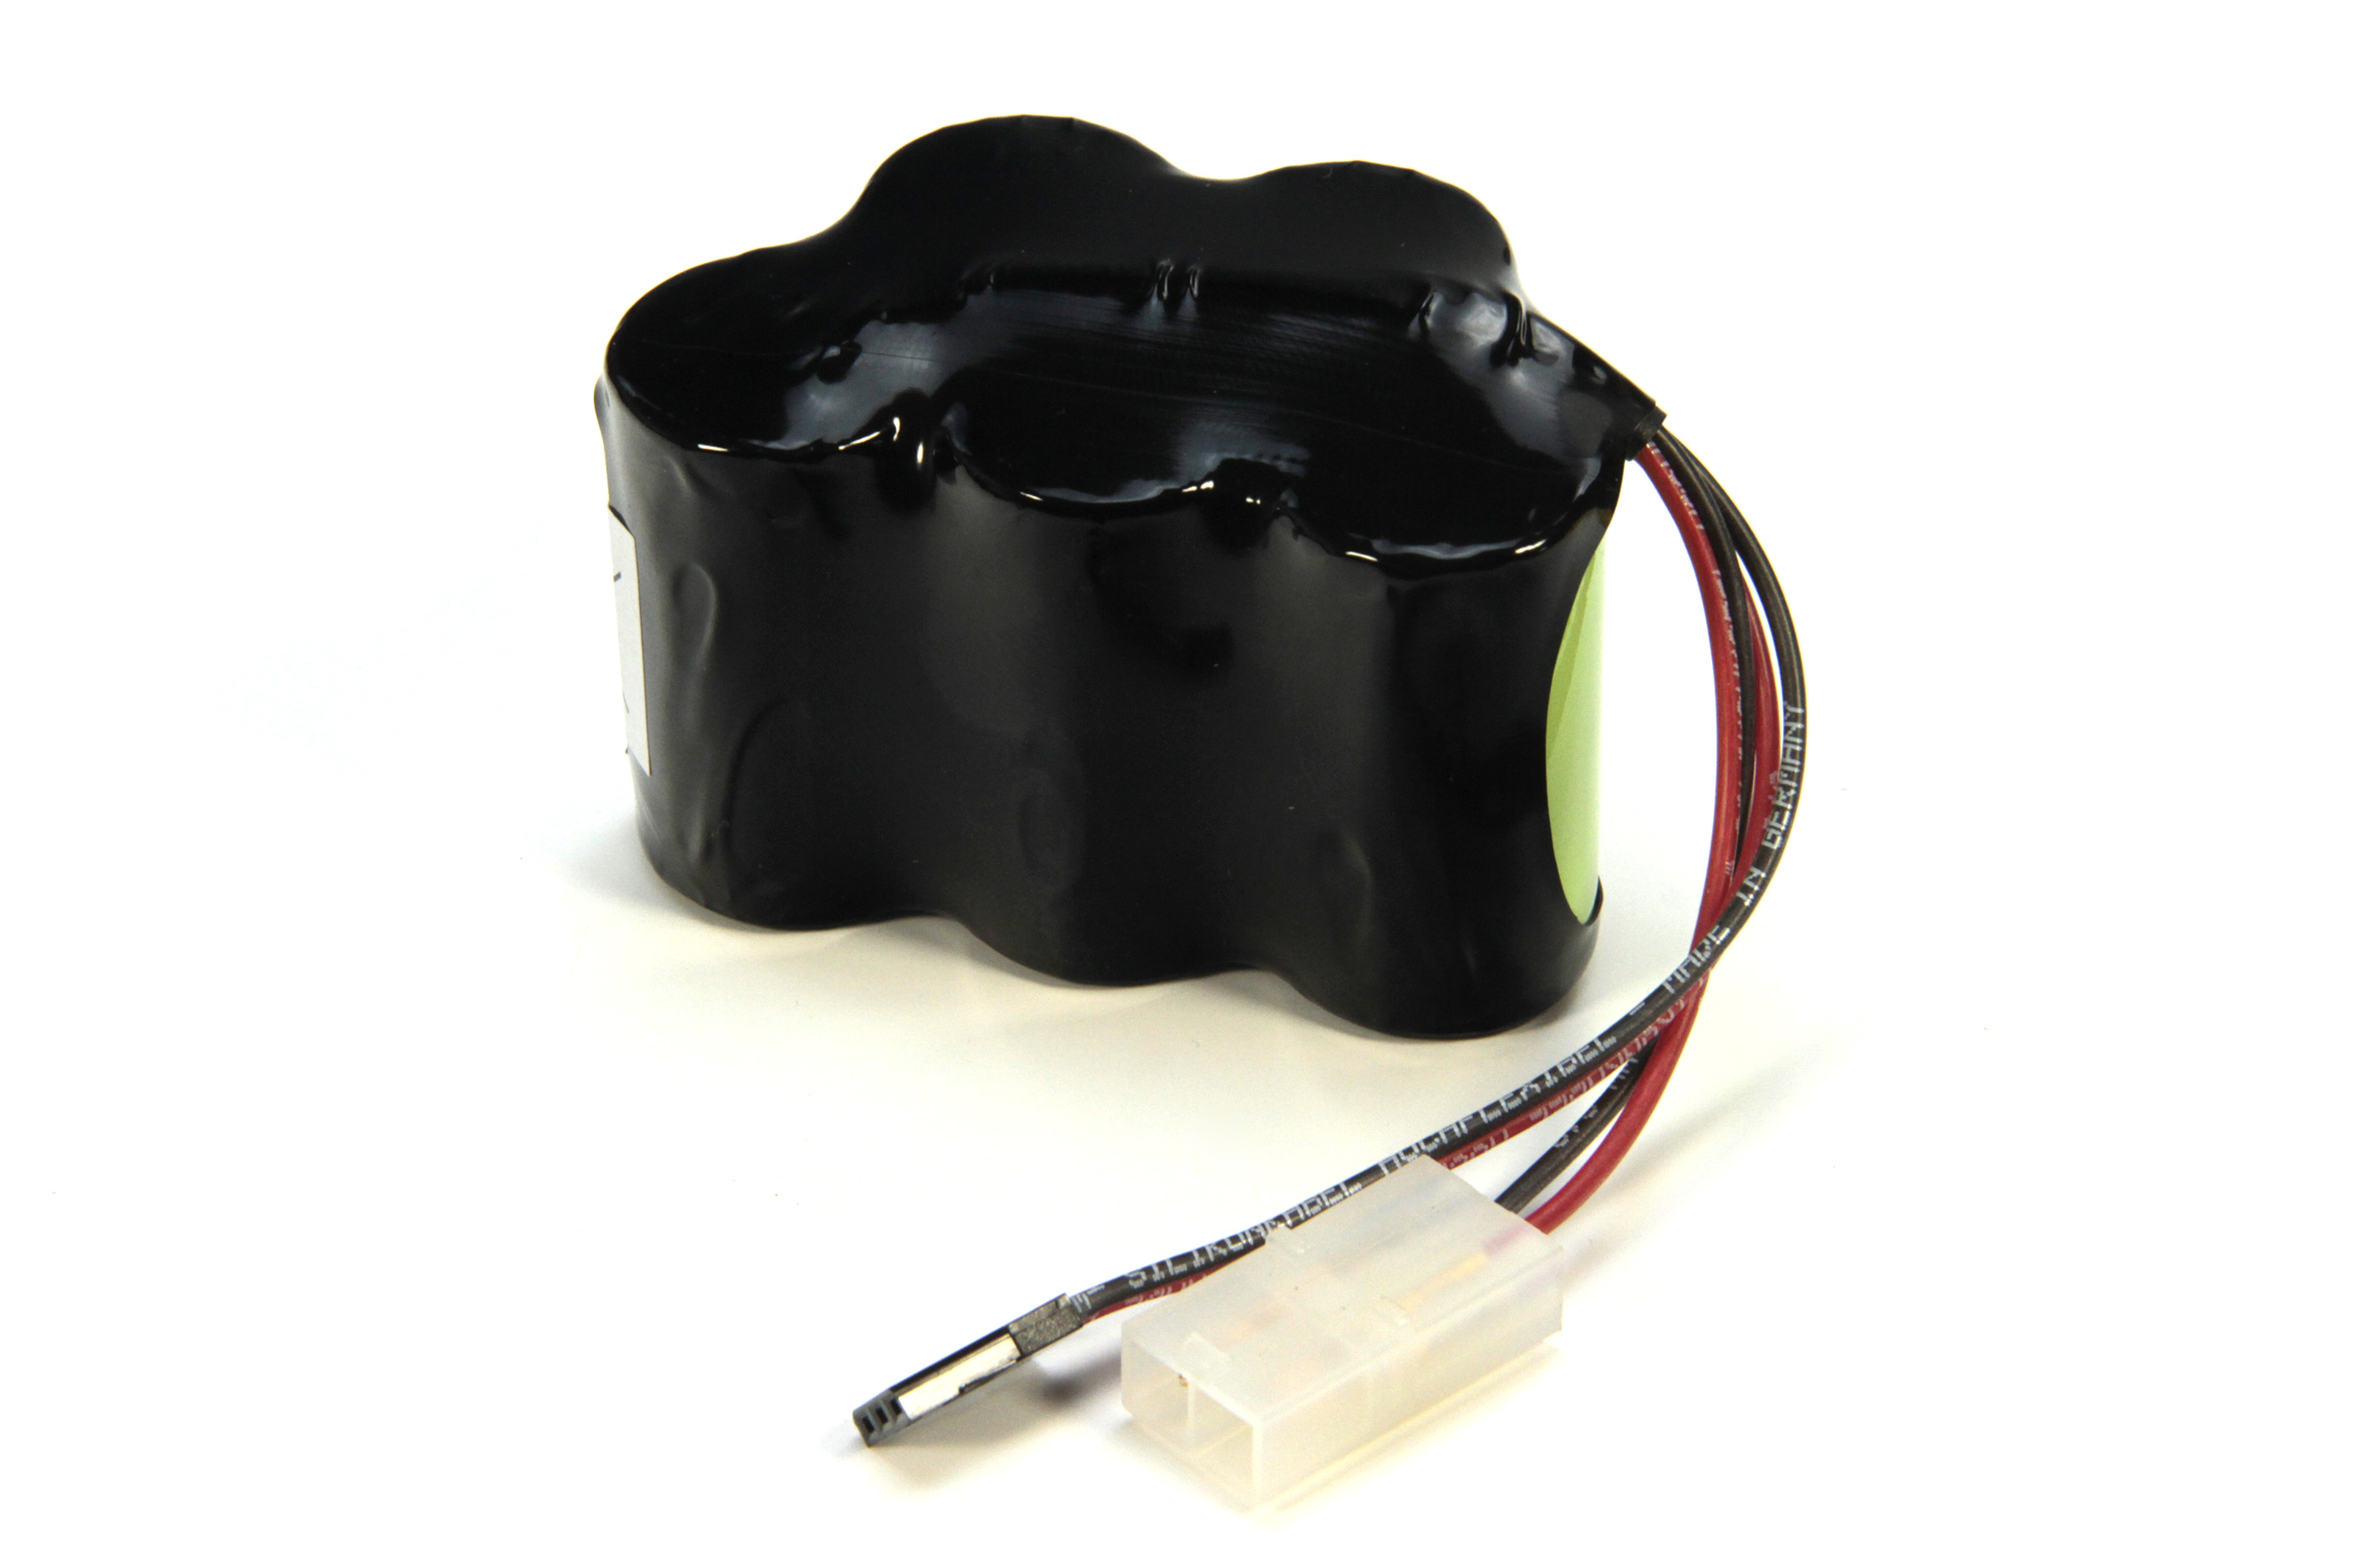 y0691 Receiver battery, hump pack, NiMh, 6V 4500 mAh with charging jack for all HPI 1/5 scale models